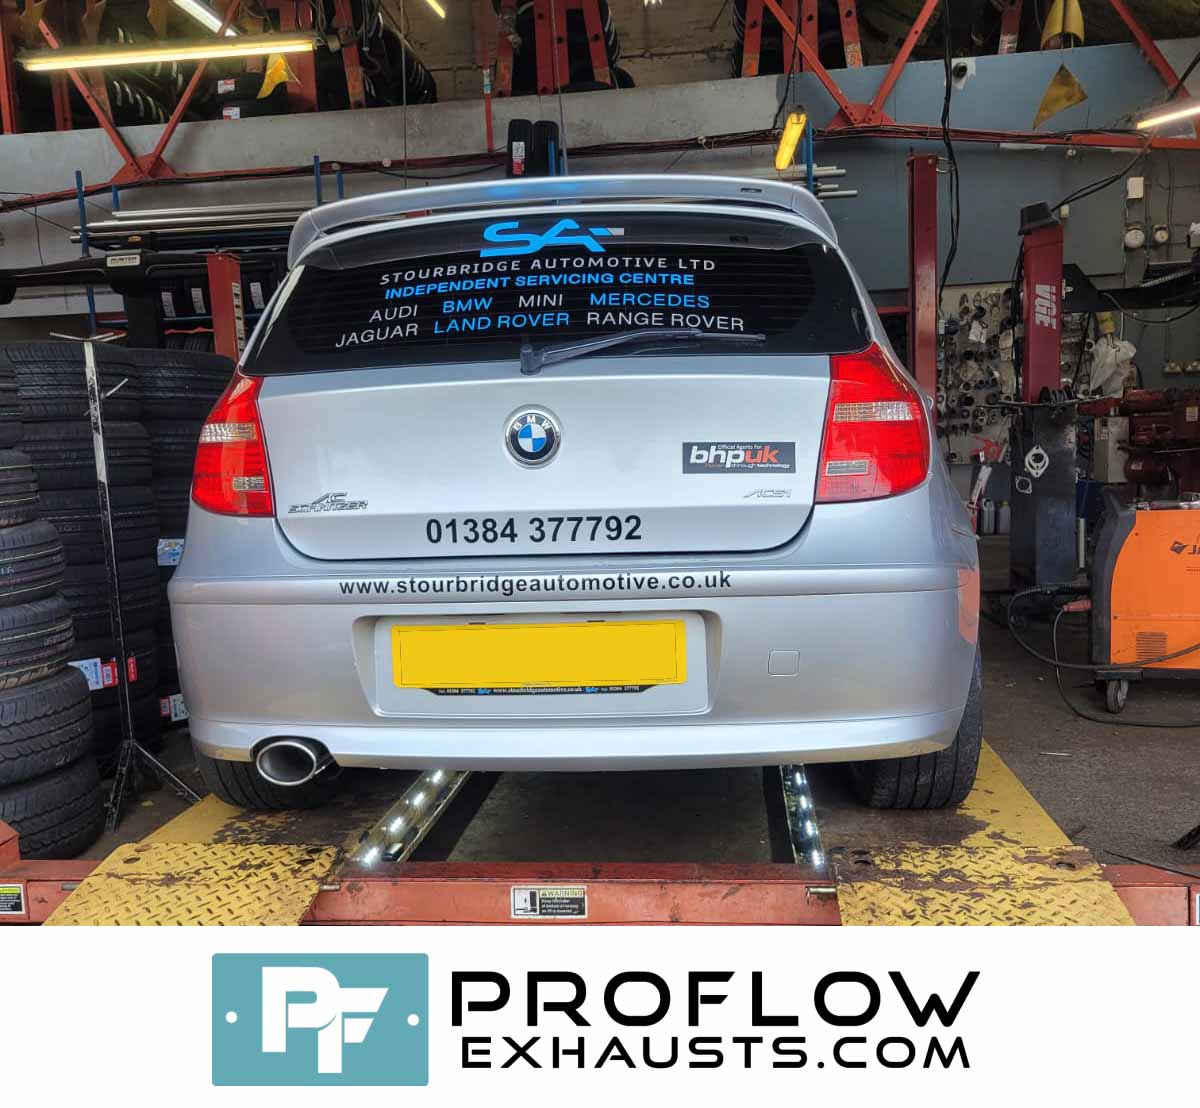 Proflow Exhausts BMW 1 Series Custom Made Stainless Steel Back Box and Tailpipe TX043